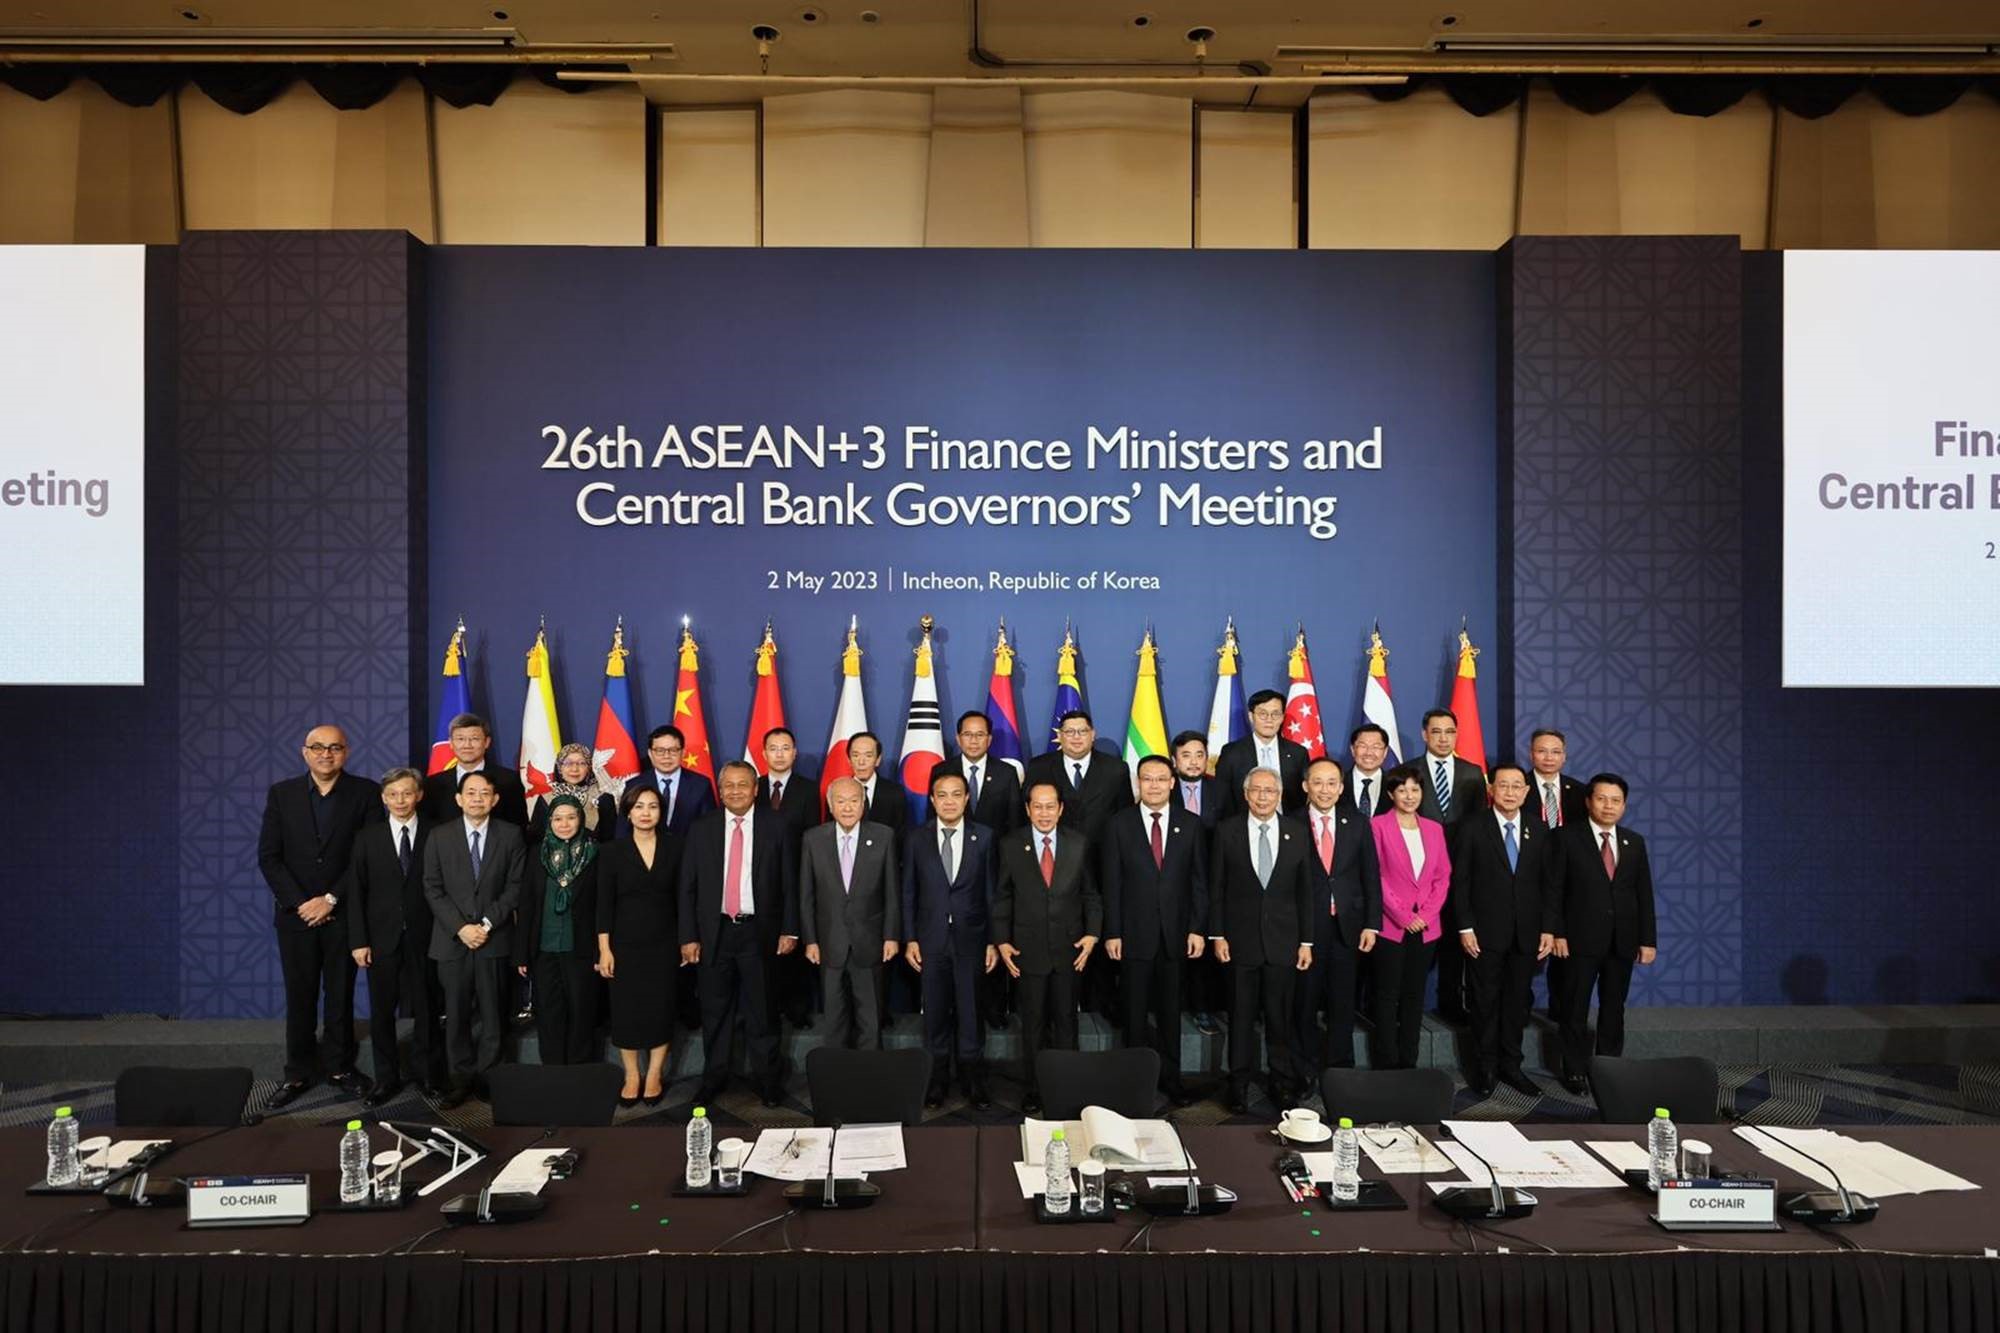 Joint Statement of the 26th ASEAN+3 Finance Ministers’ and Central Bank